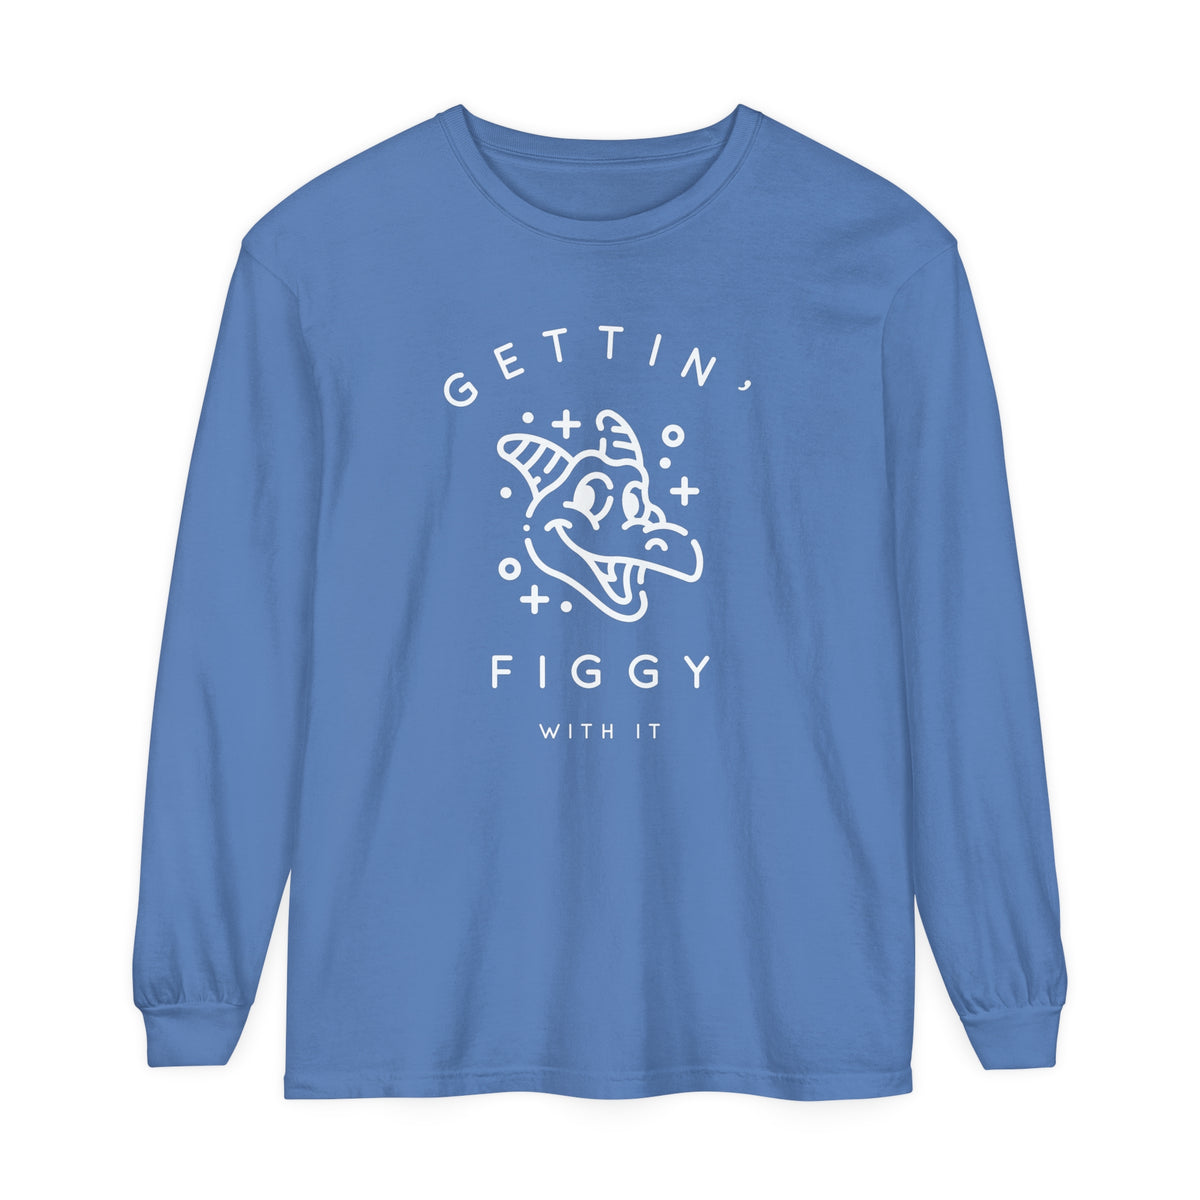 Gettin' Figgy With It Comfort Colors Unisex Garment-dyed Long Sleeve T-Shirt